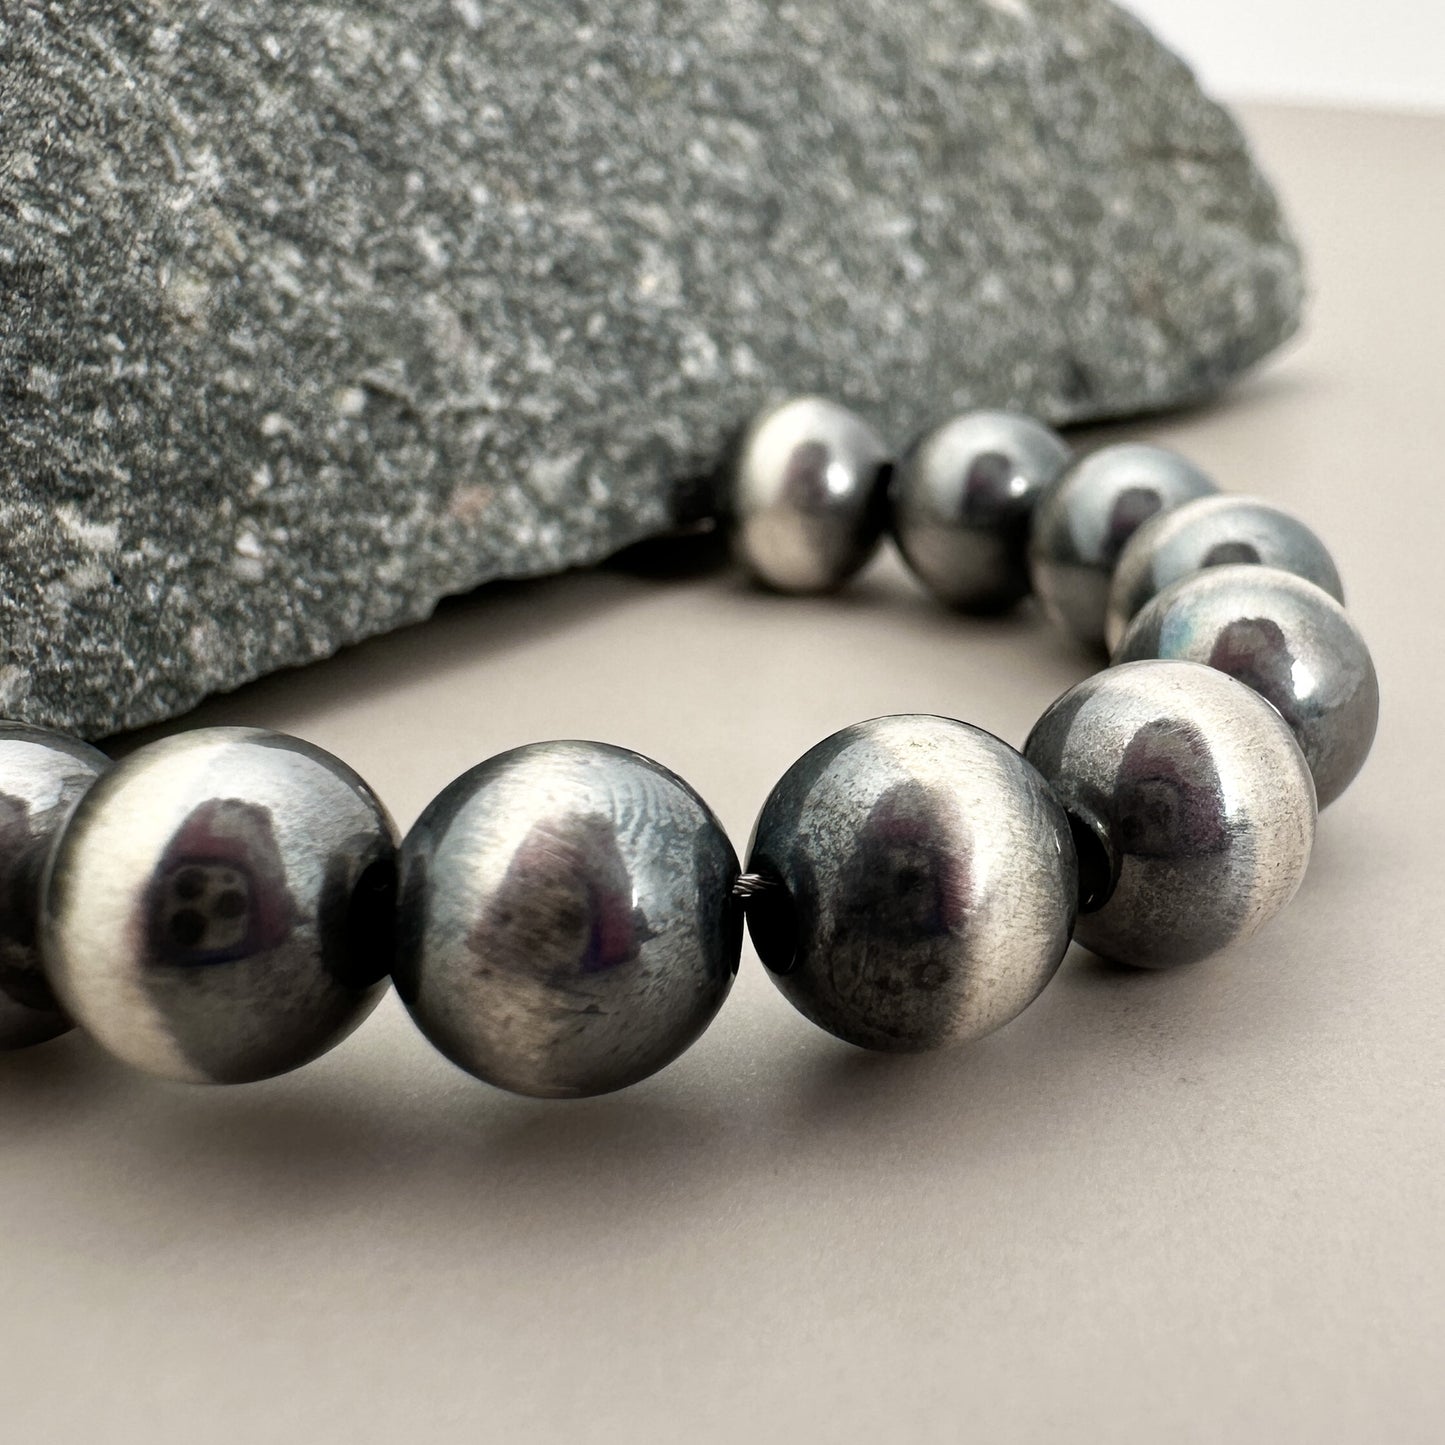 8mm Navajo Smooth Round Bead (Oxidized Sterling Silver) - 1 pc. (M1763)